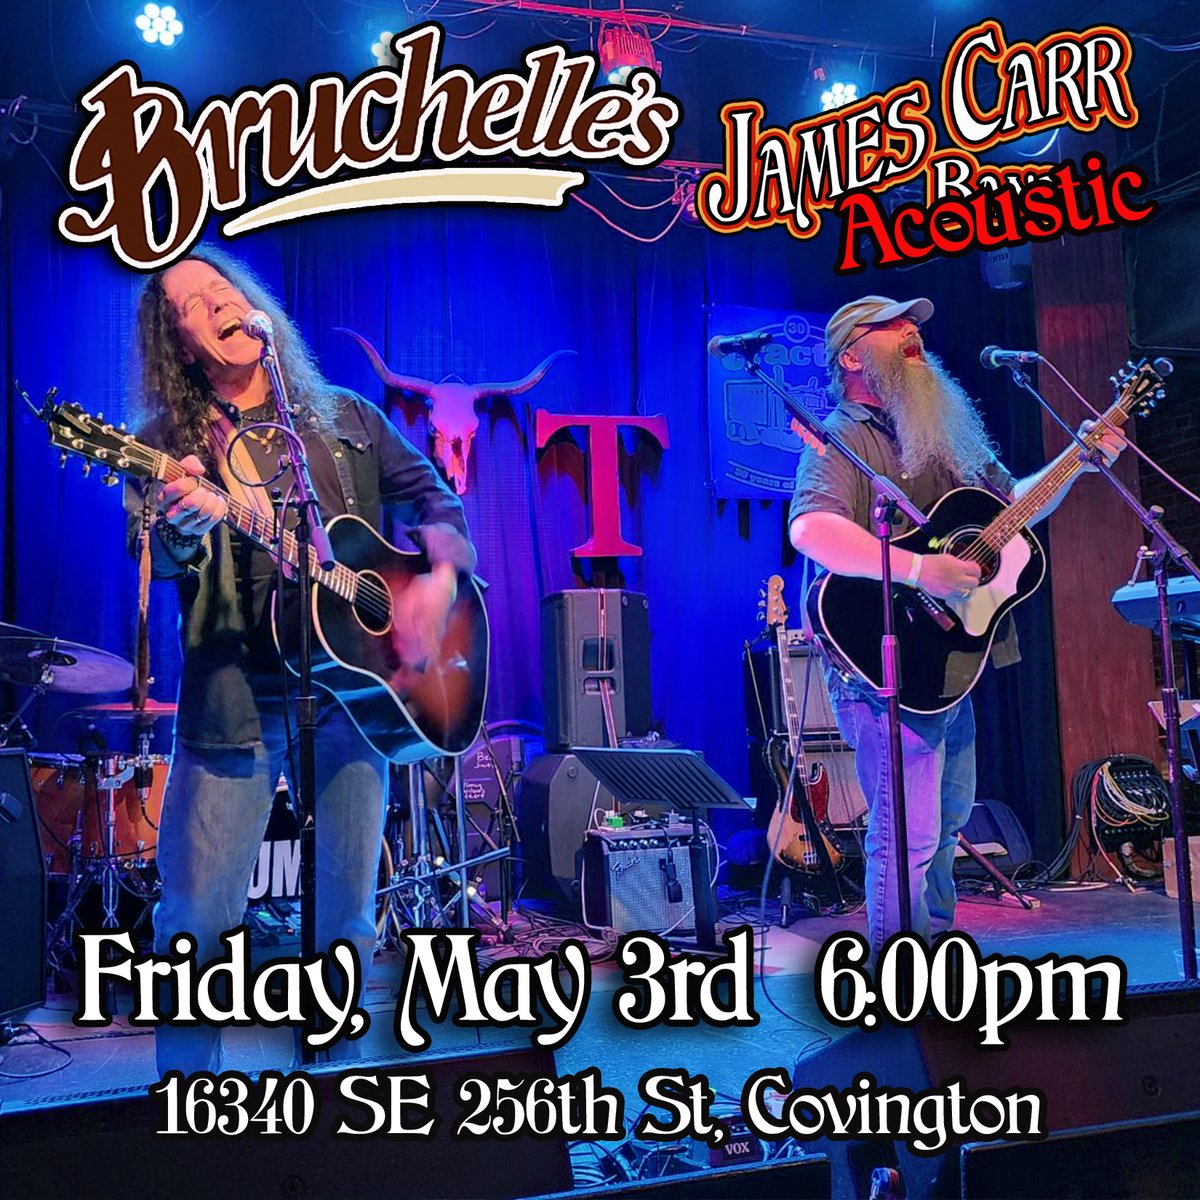 Join Dean and I in Covington next Friday at Bruchelle's. Excited to be back and hope the weather is nice so we can play outside! They have great food and drinks! See you there!